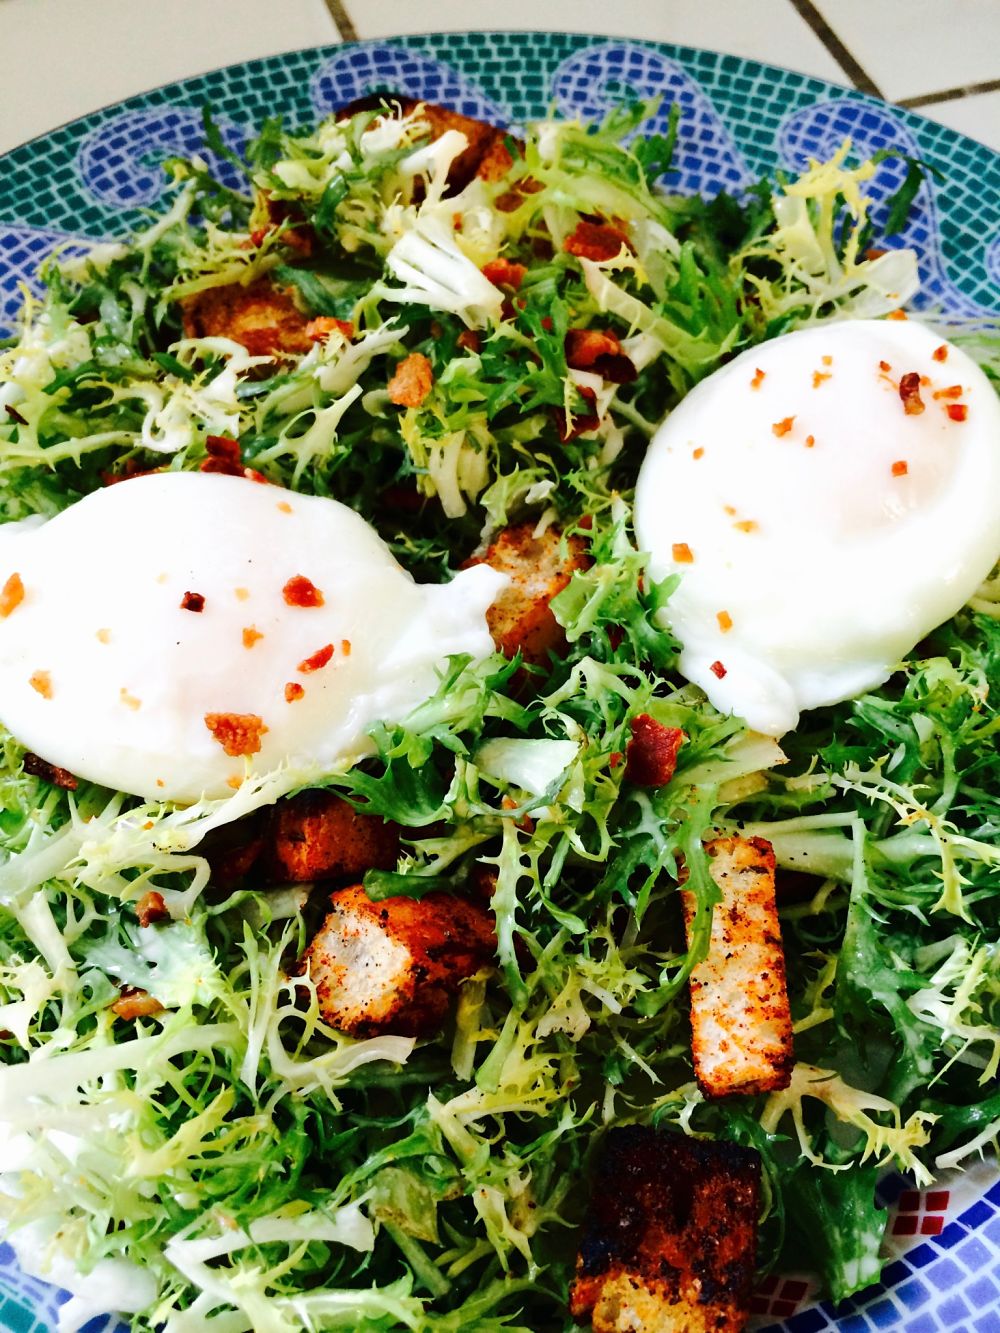 Bacon & Eggs Frise Salad When you want a substantial salad but don't want a lot of fuss. This recipe for Bacon and Eggs Frise' Salad will fill you up and not break the calorie budget! https://westviamidwest.com